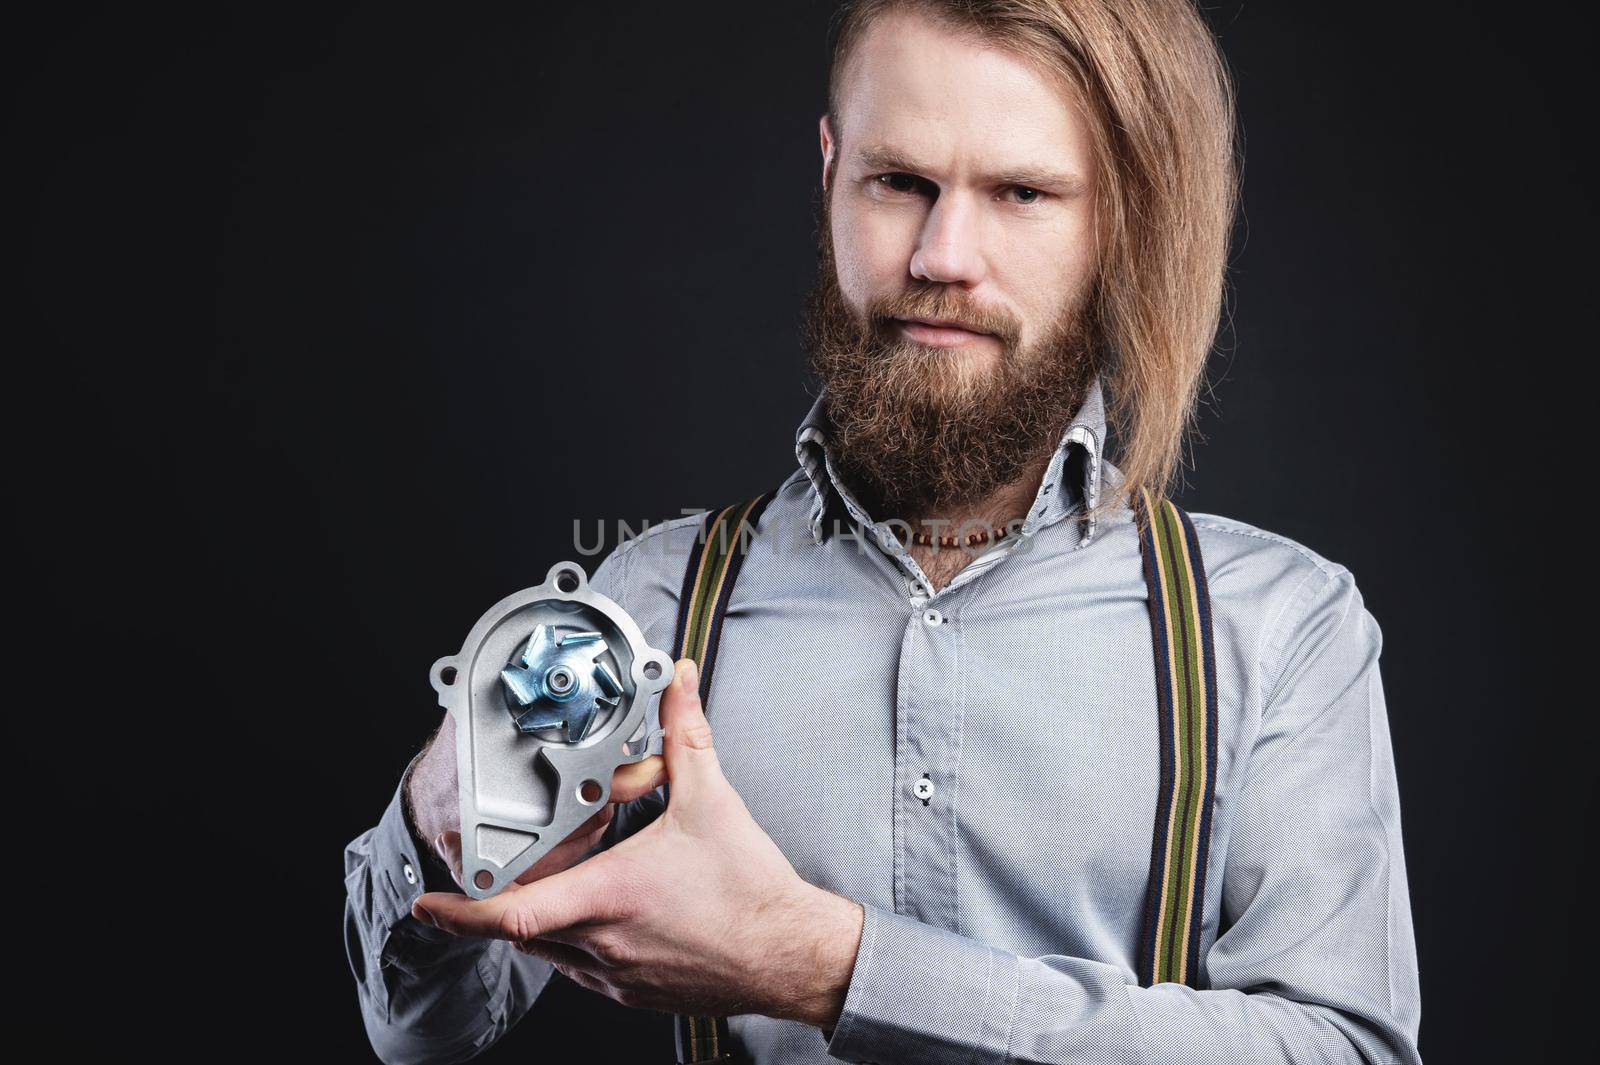 Studio portrait of a bearded stylish long-haired man in a shirt with suspenders. Holding car parts internal combustion engine water cooling pump